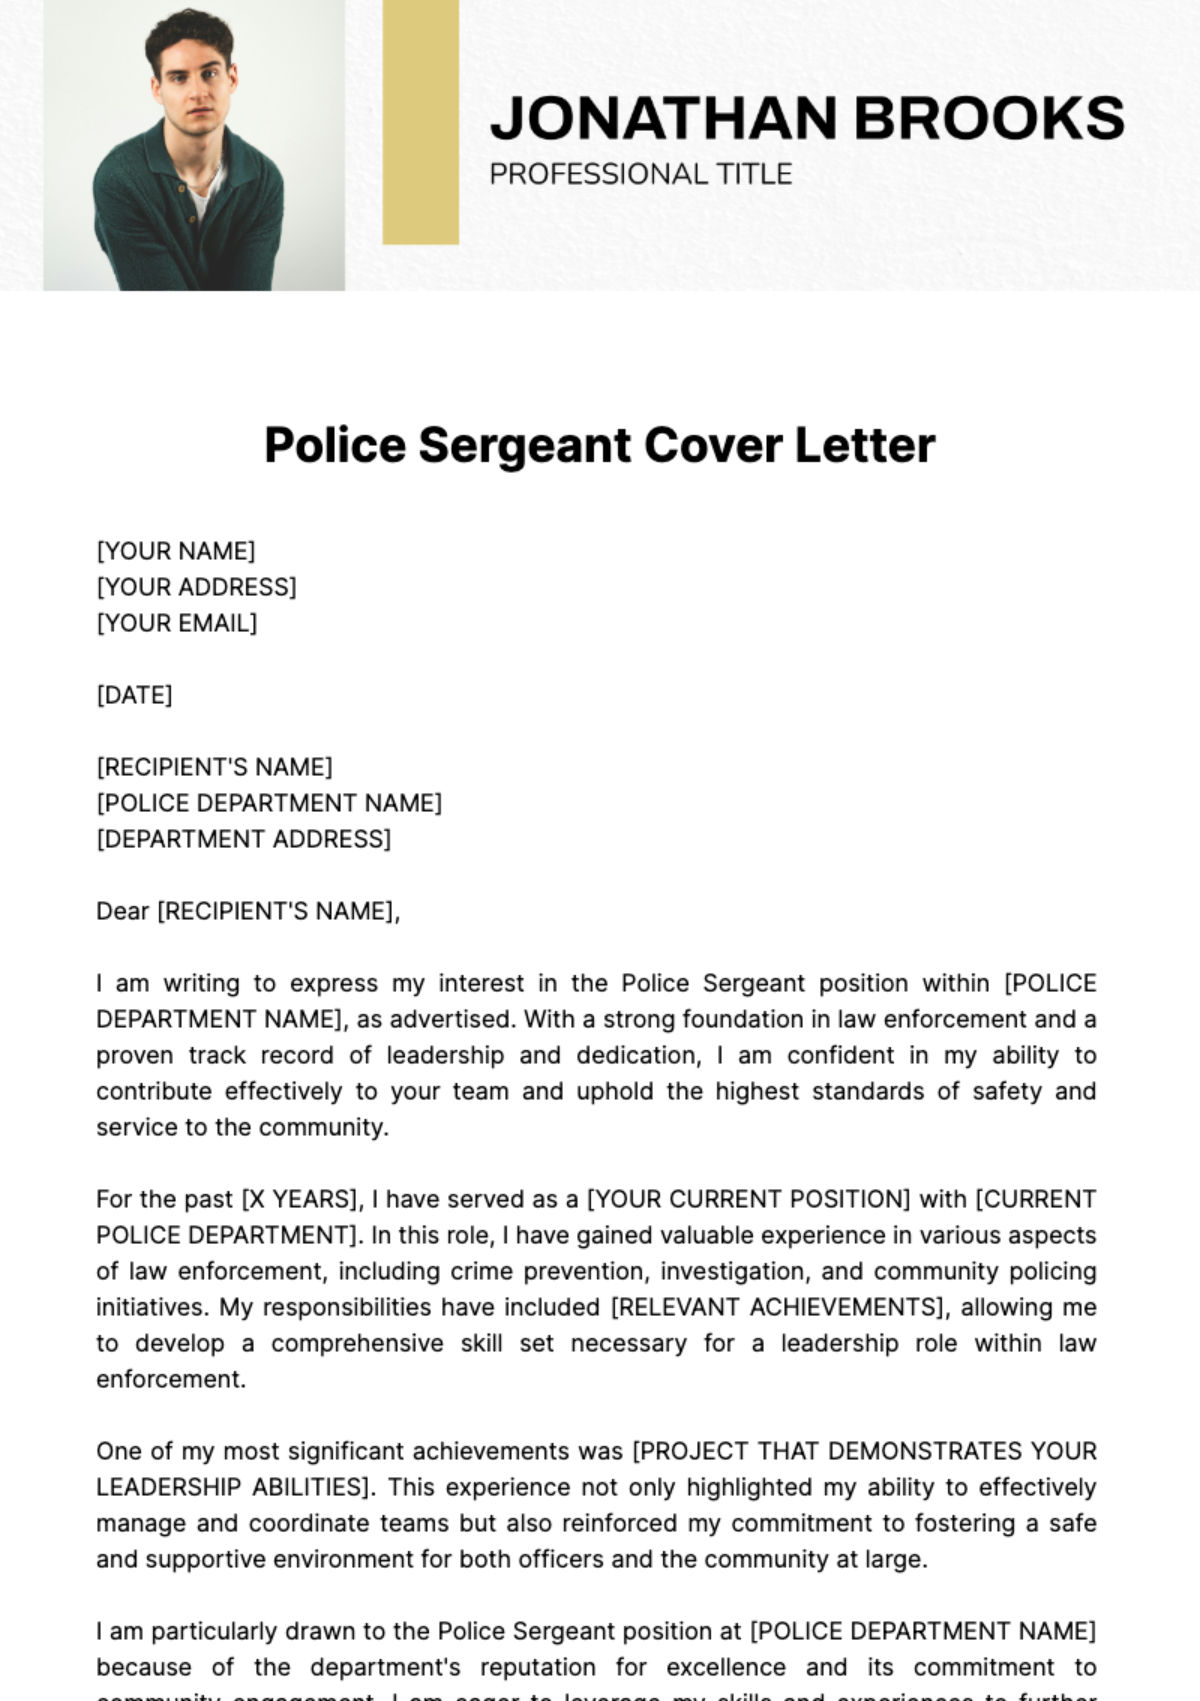 Police Sergeant Cover Letter Template